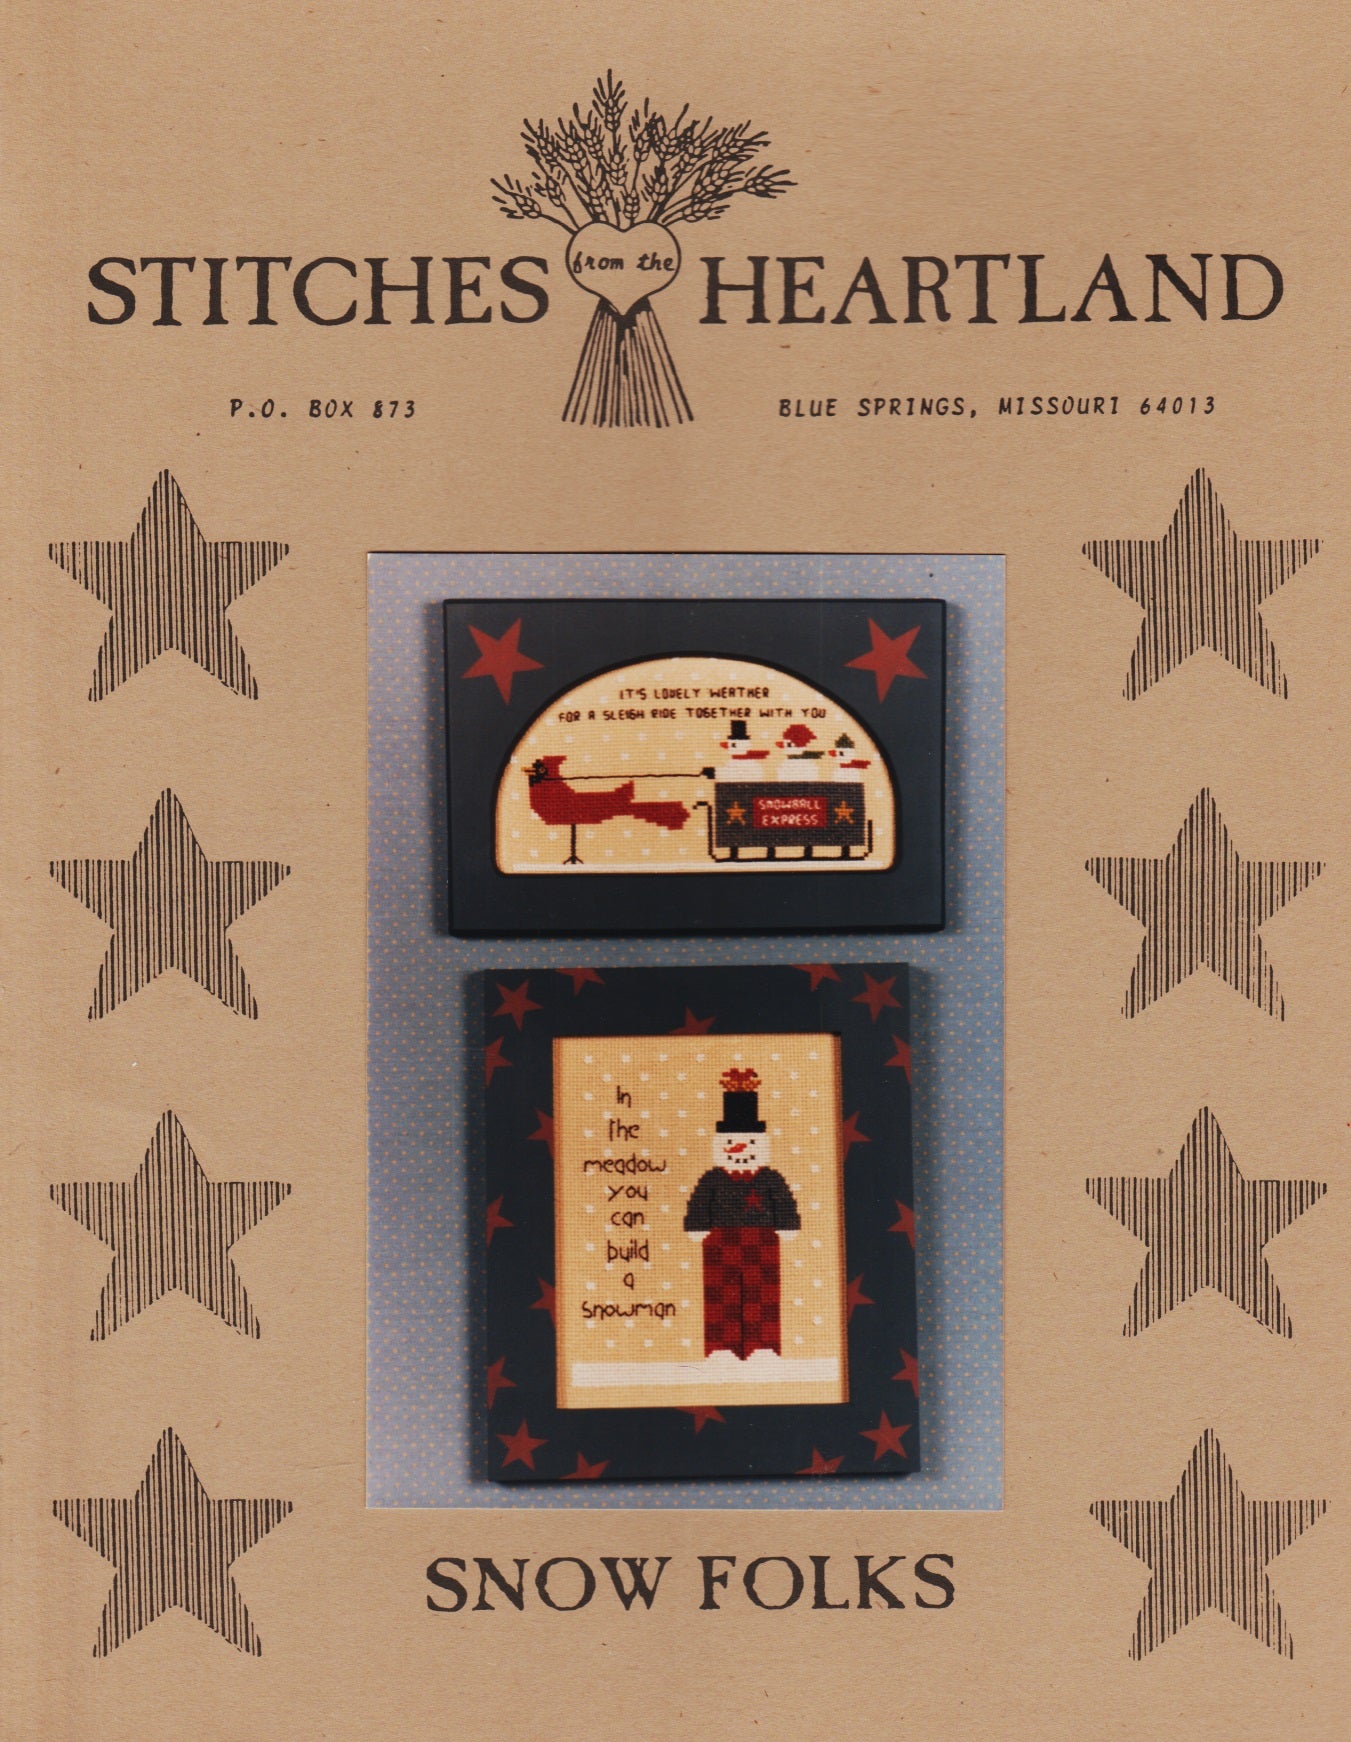 Stitches From The Heartland Snow Folks snowman cross stitch pattern